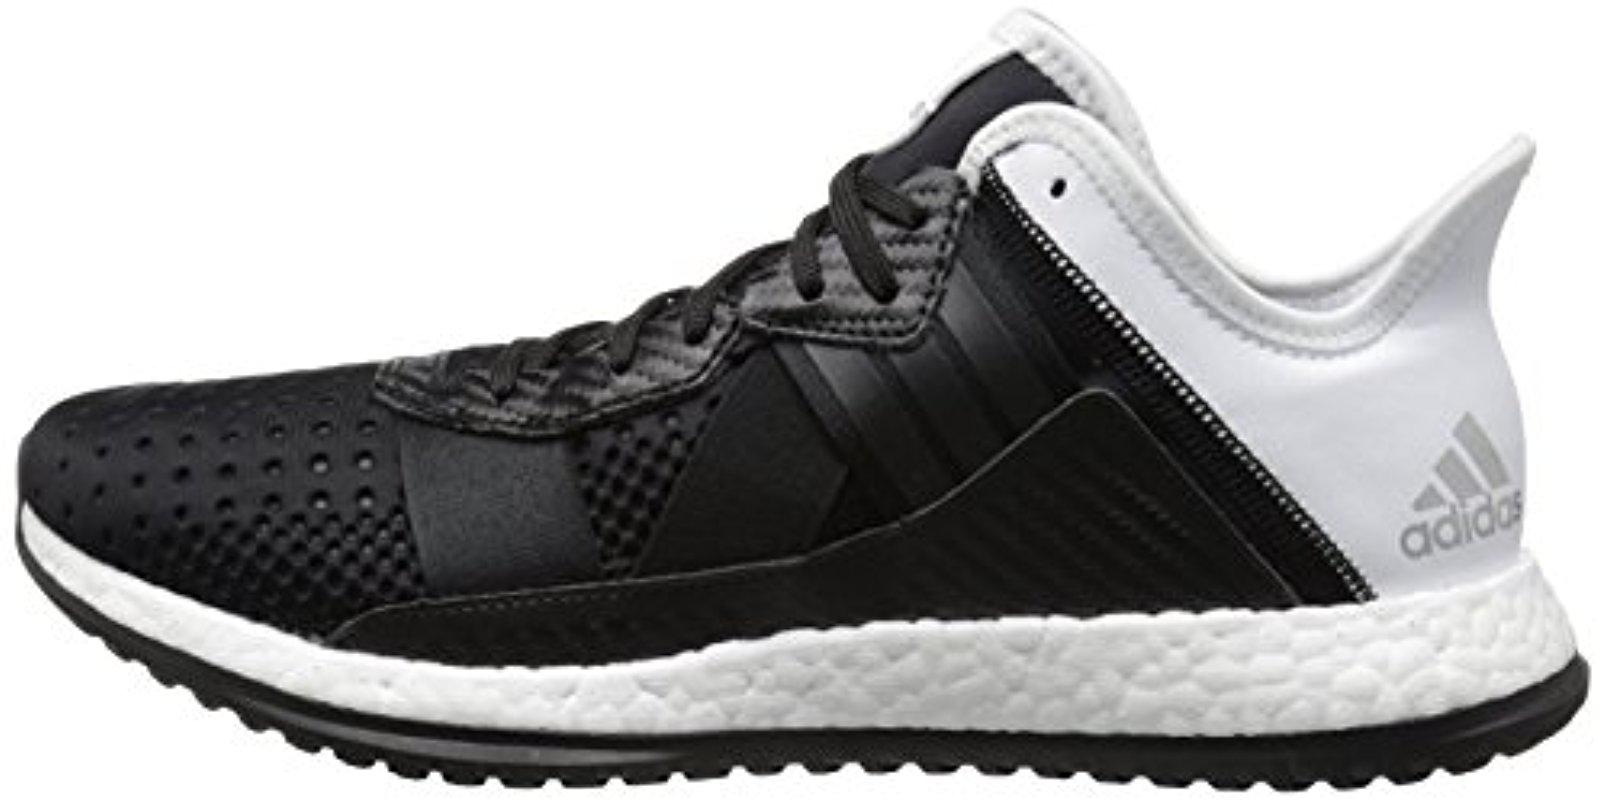 Adidas Synthetic Pure Boost Zg Trainer Training Shoe In Black Silver White Black For Men Lyst